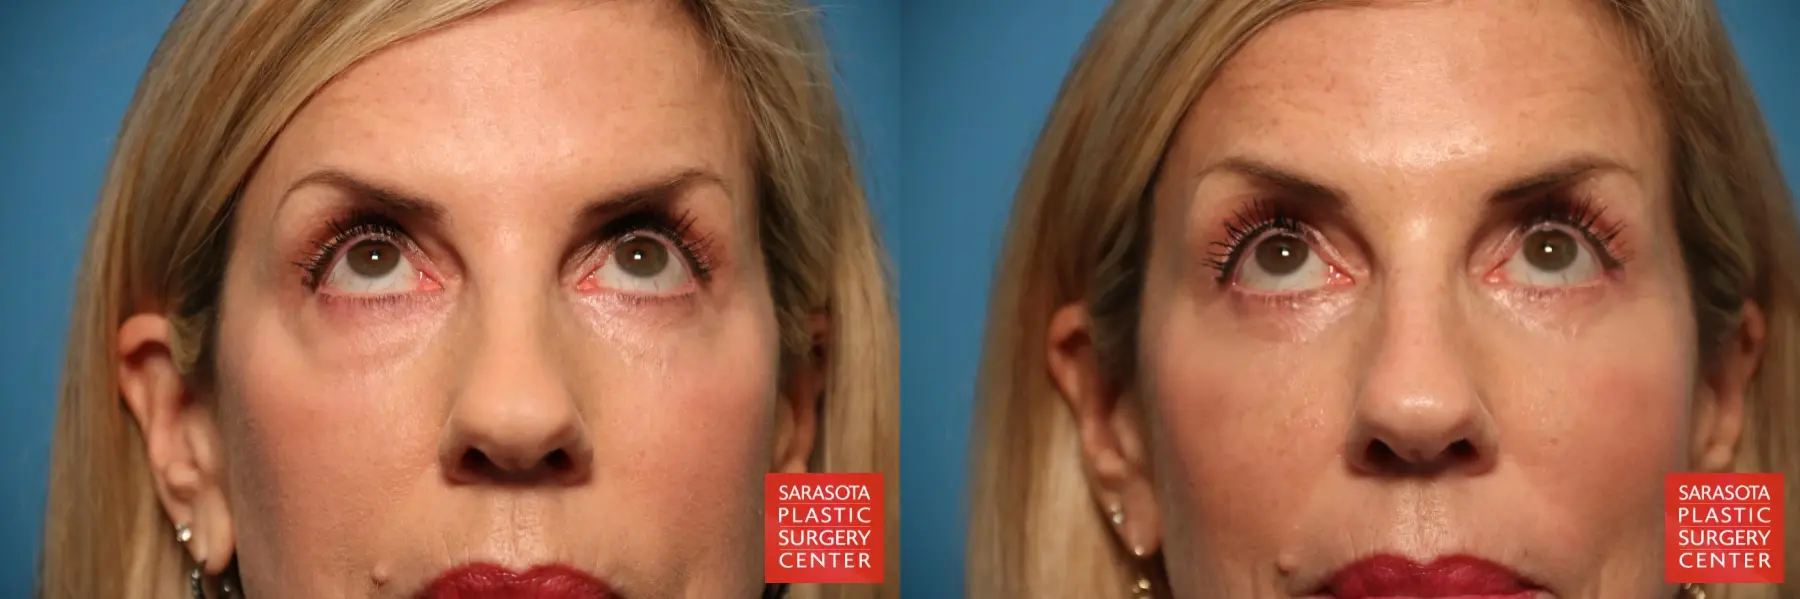 Eyelid Surgery: Patient 10 - Before and After 4